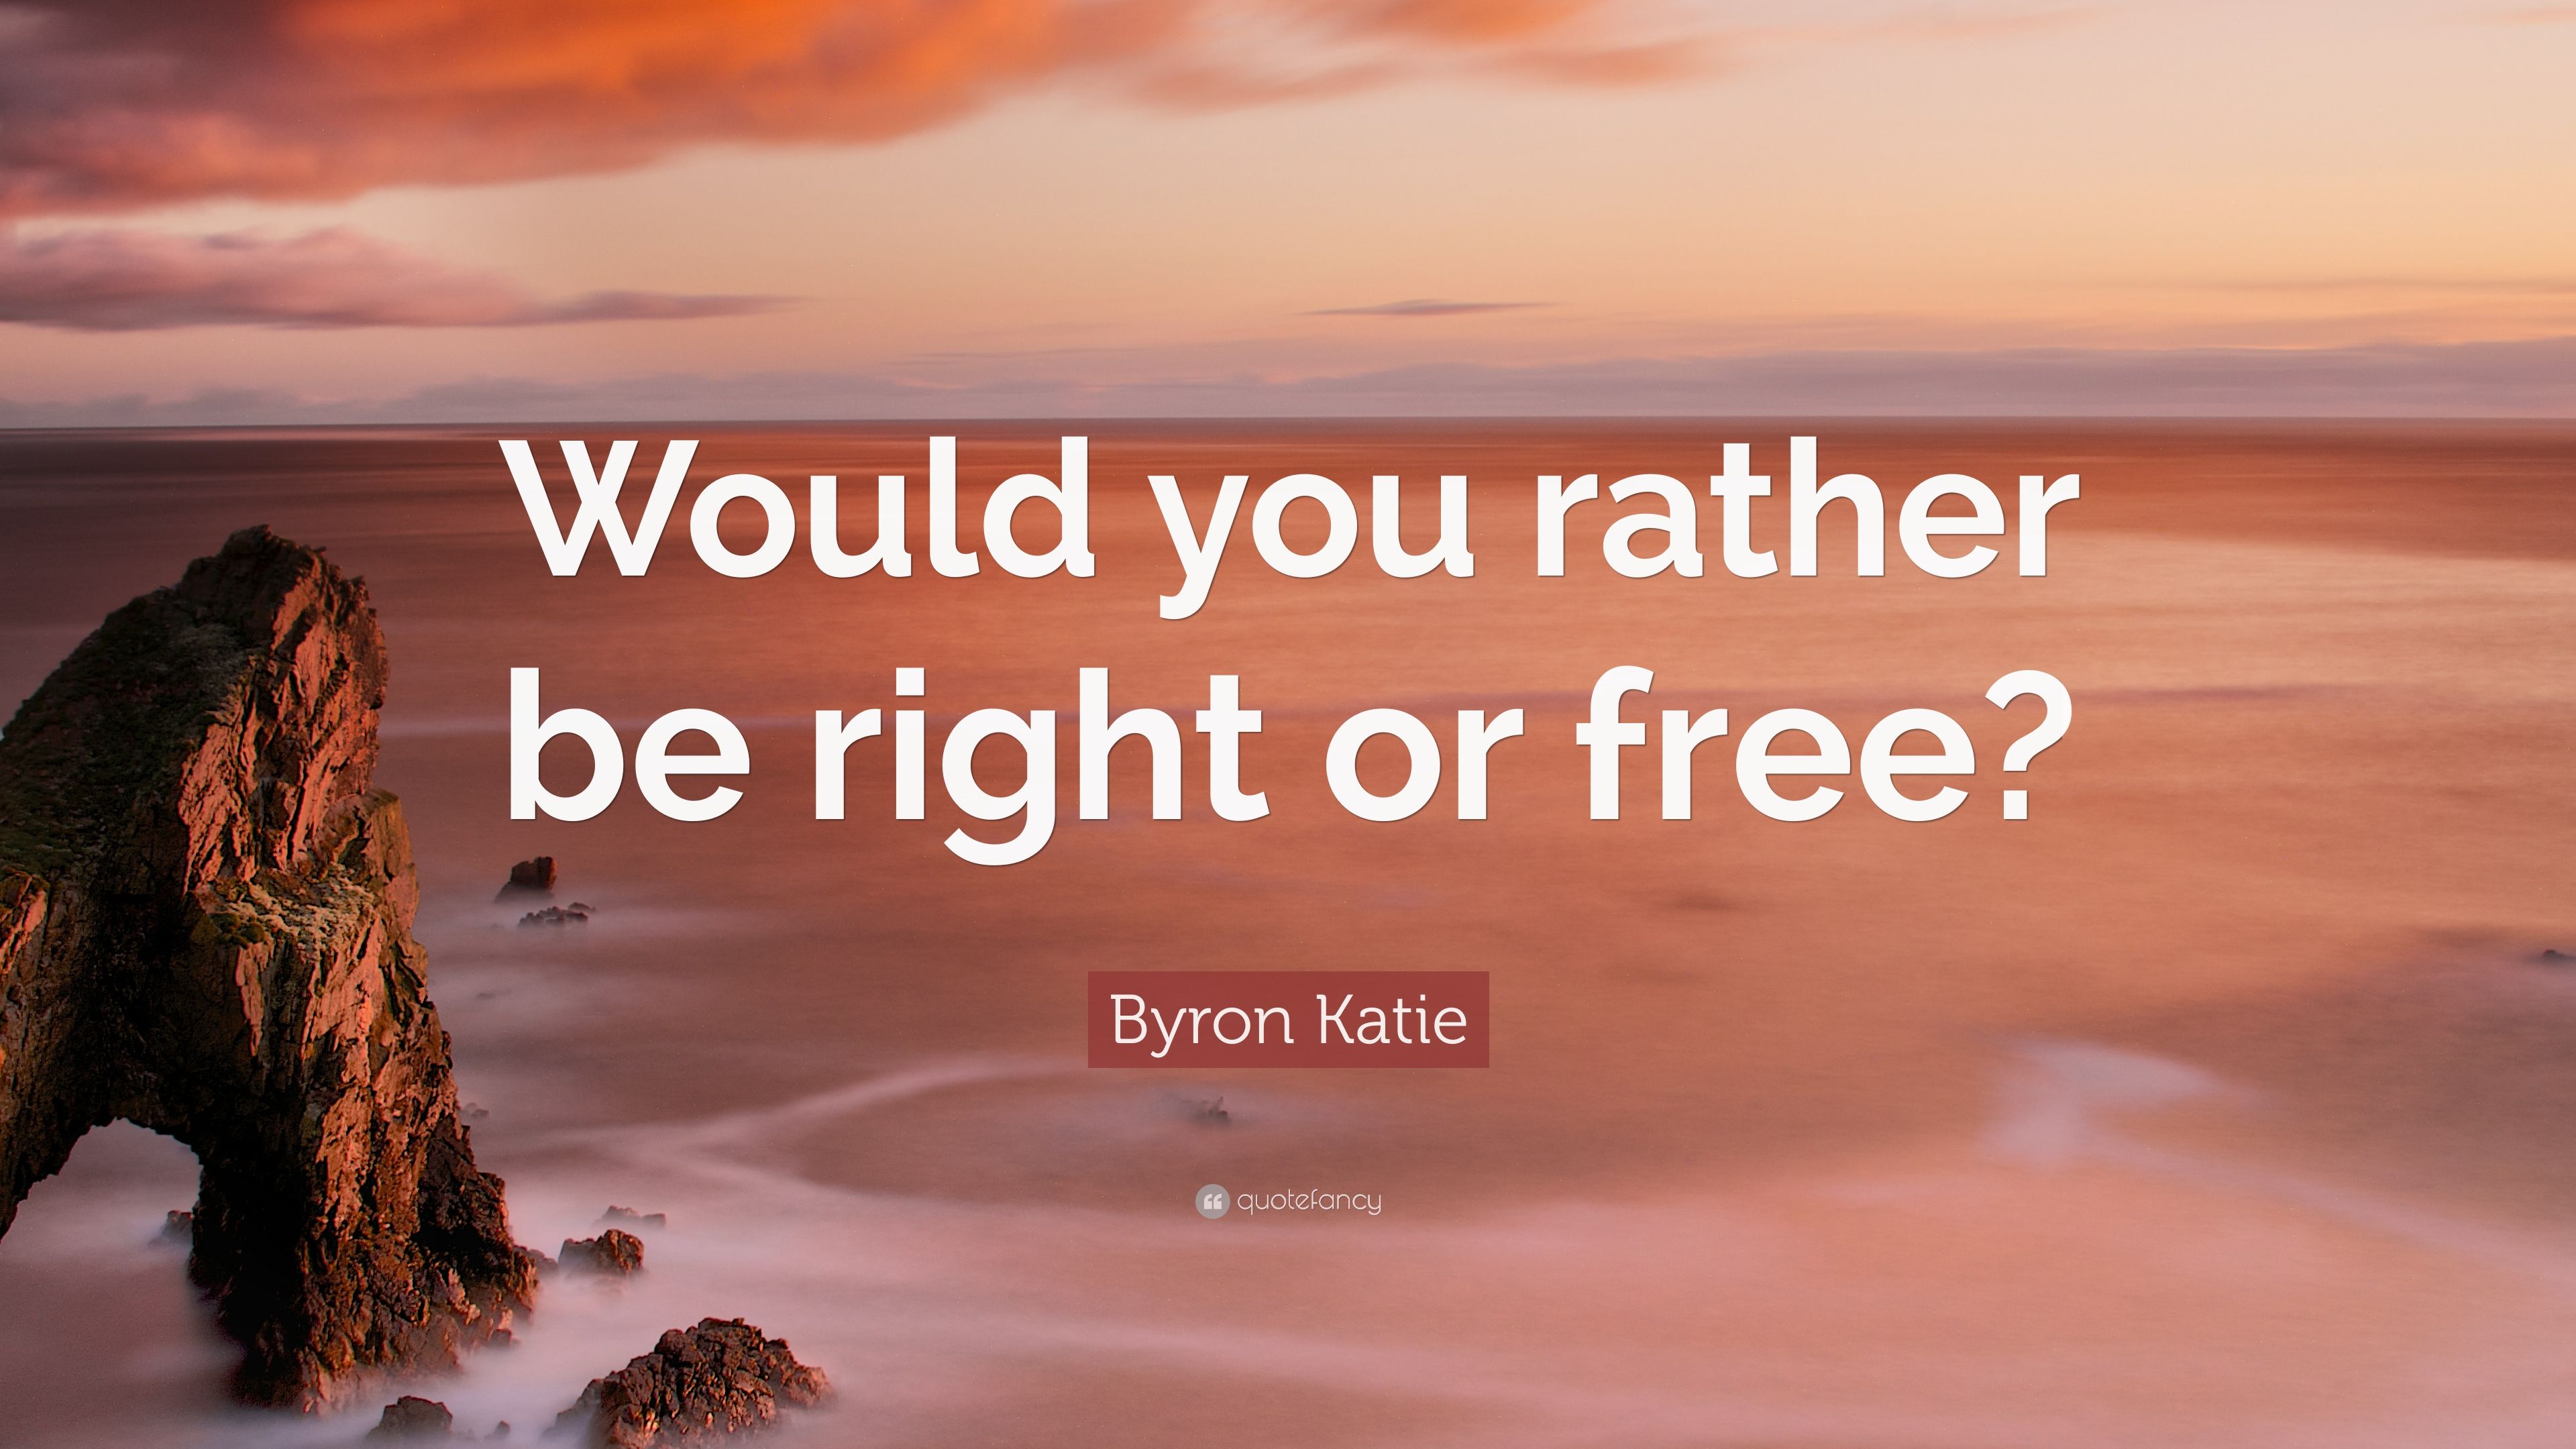 Byron Katie Quote: “Would you rather be right or free?” (7 wallpaper)